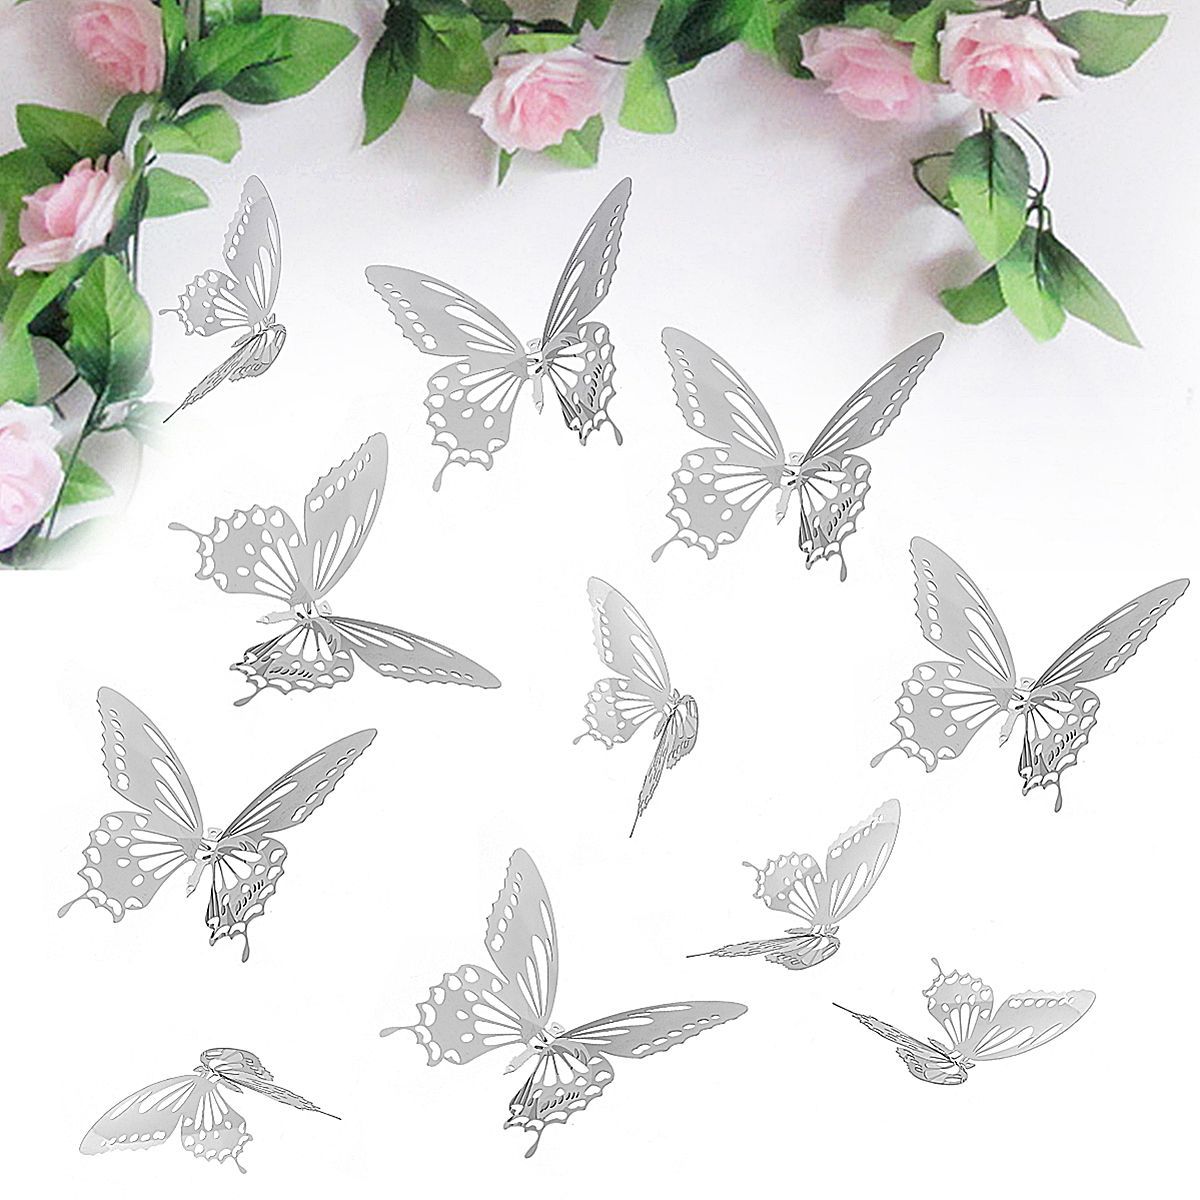 10Pcs-3D-Stainless-Butterfly-Wall-Stickers-Silver-Mirror-Decals-Mural-Home-Decorations-1153831